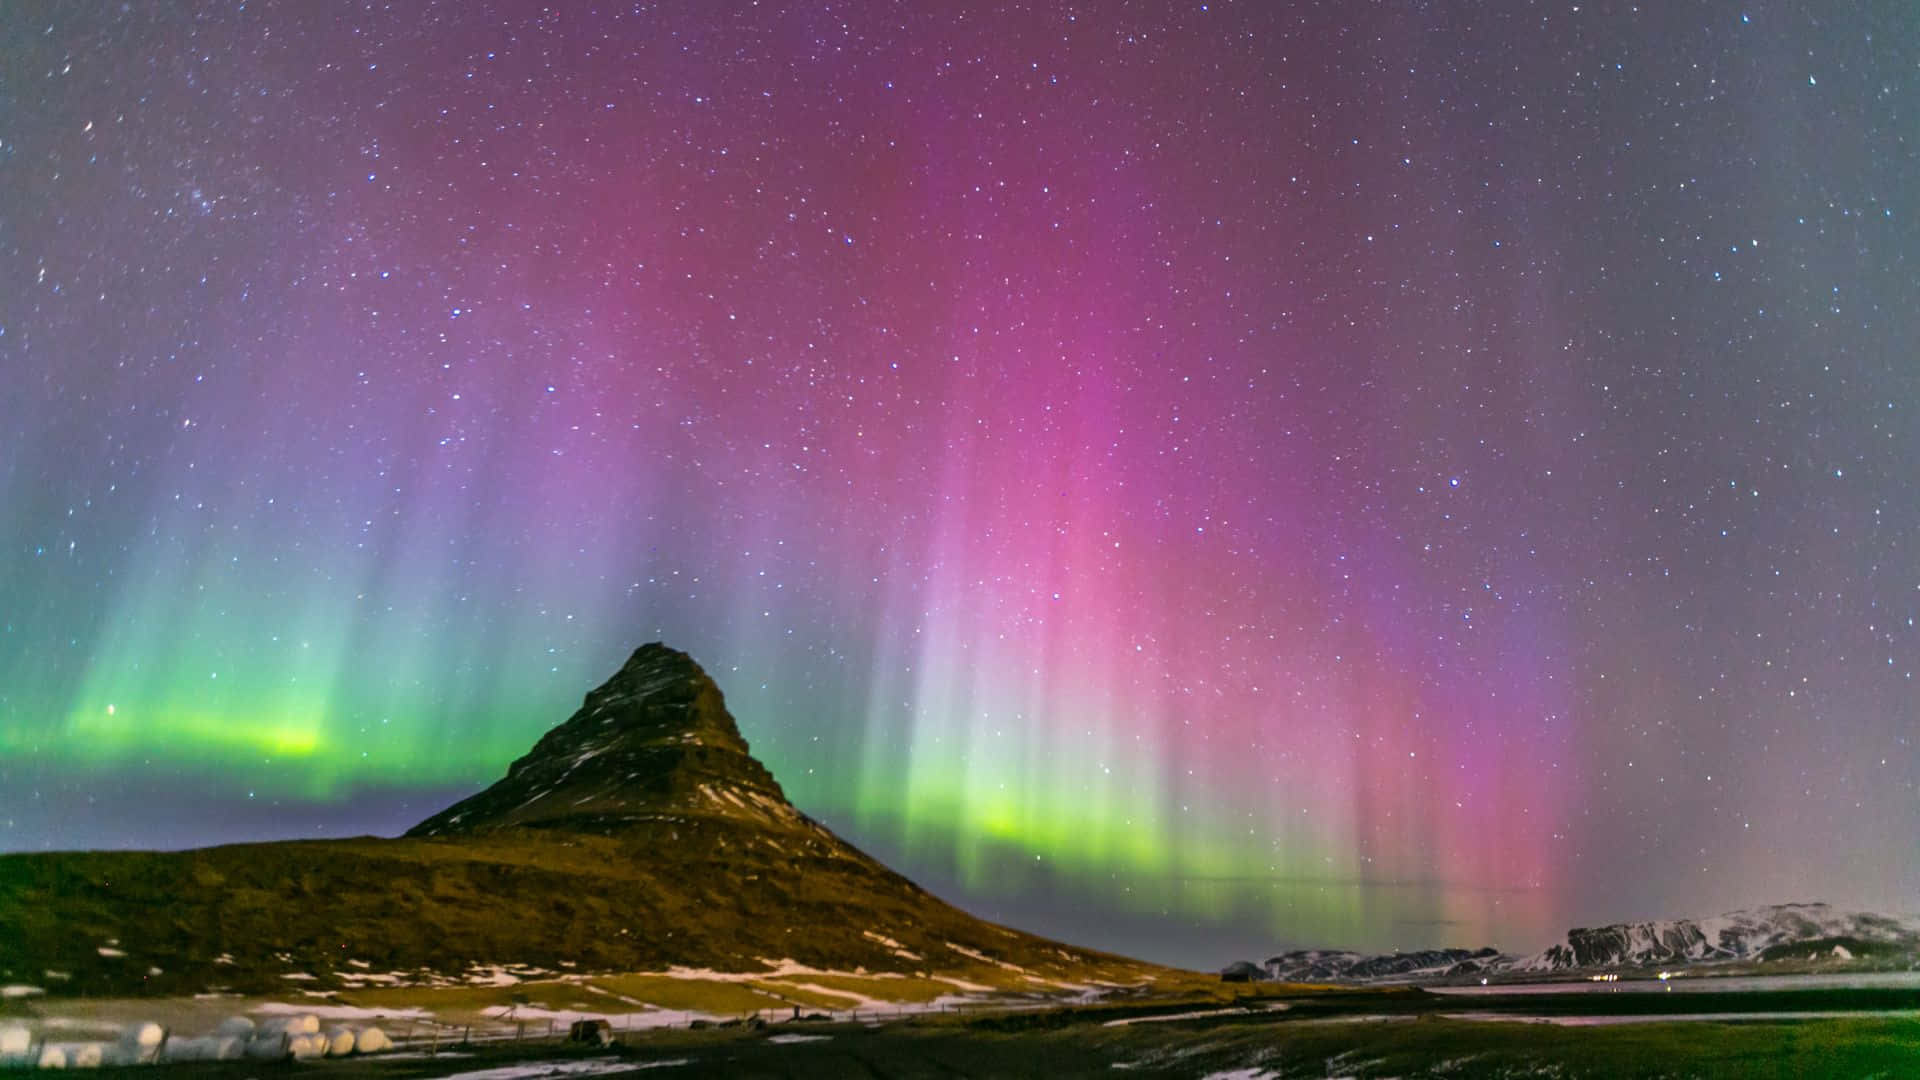 'Experience the otherworldly beauty of Iceland'